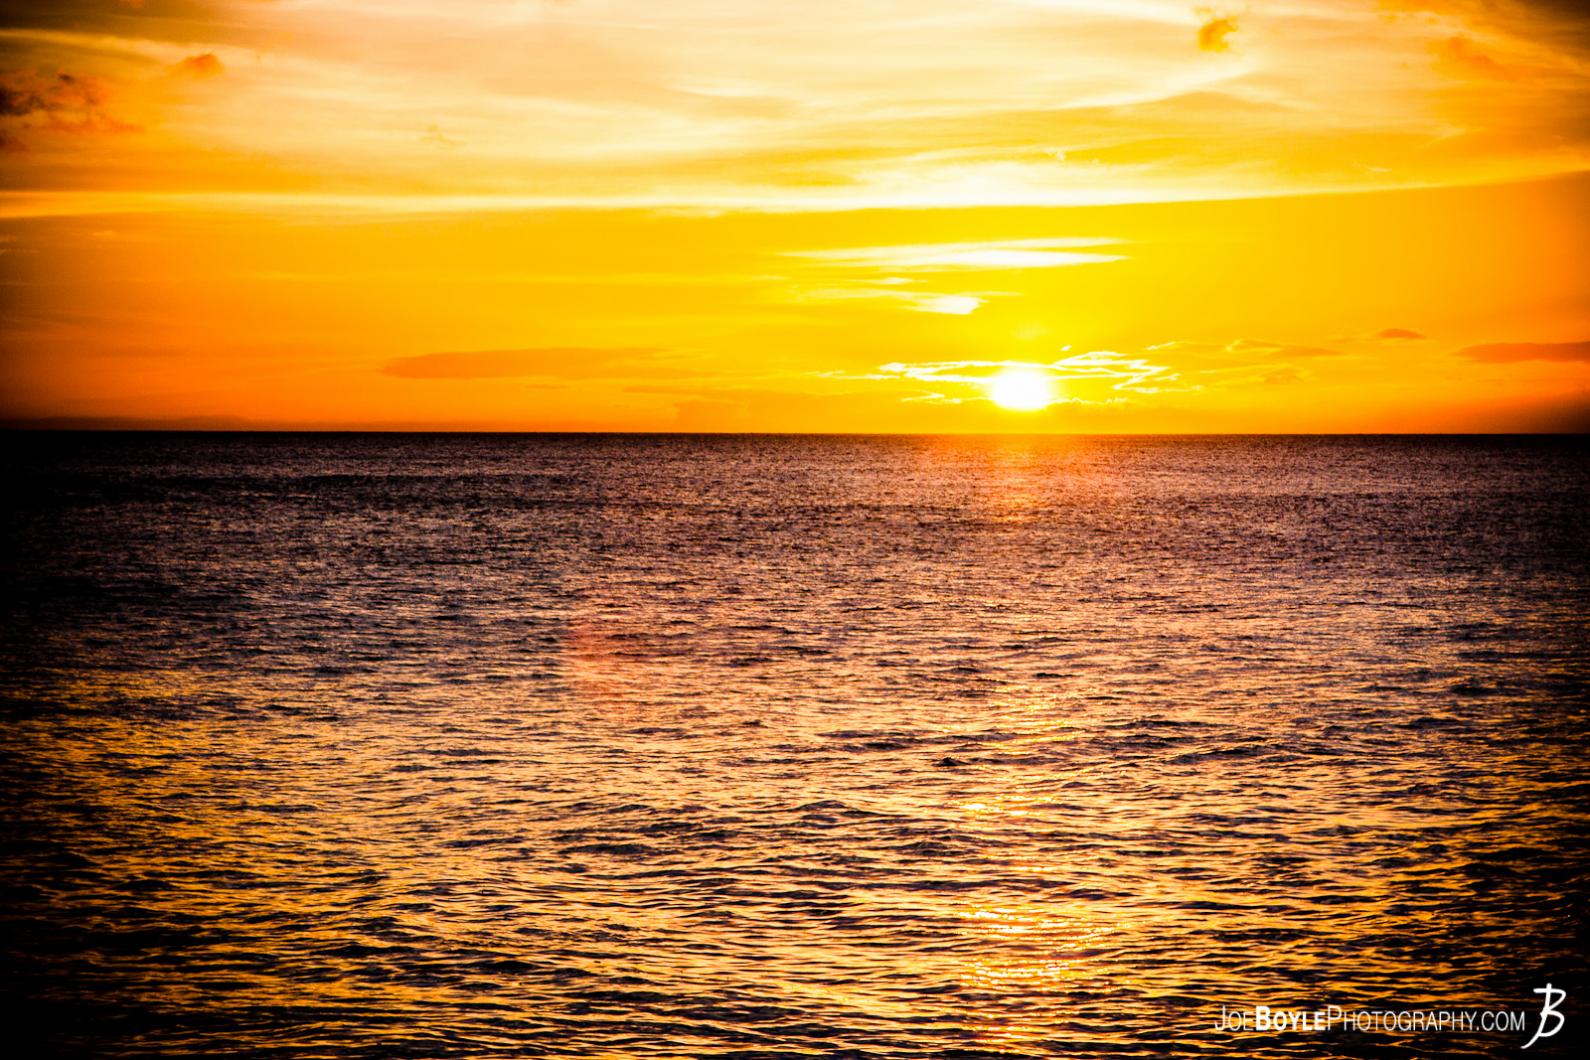 While staying at the Aulani Disney Resort, I ventured out one evening to hopefully capture some beautiful images of the sunset over the Pacific Ocean and I came back with this image!